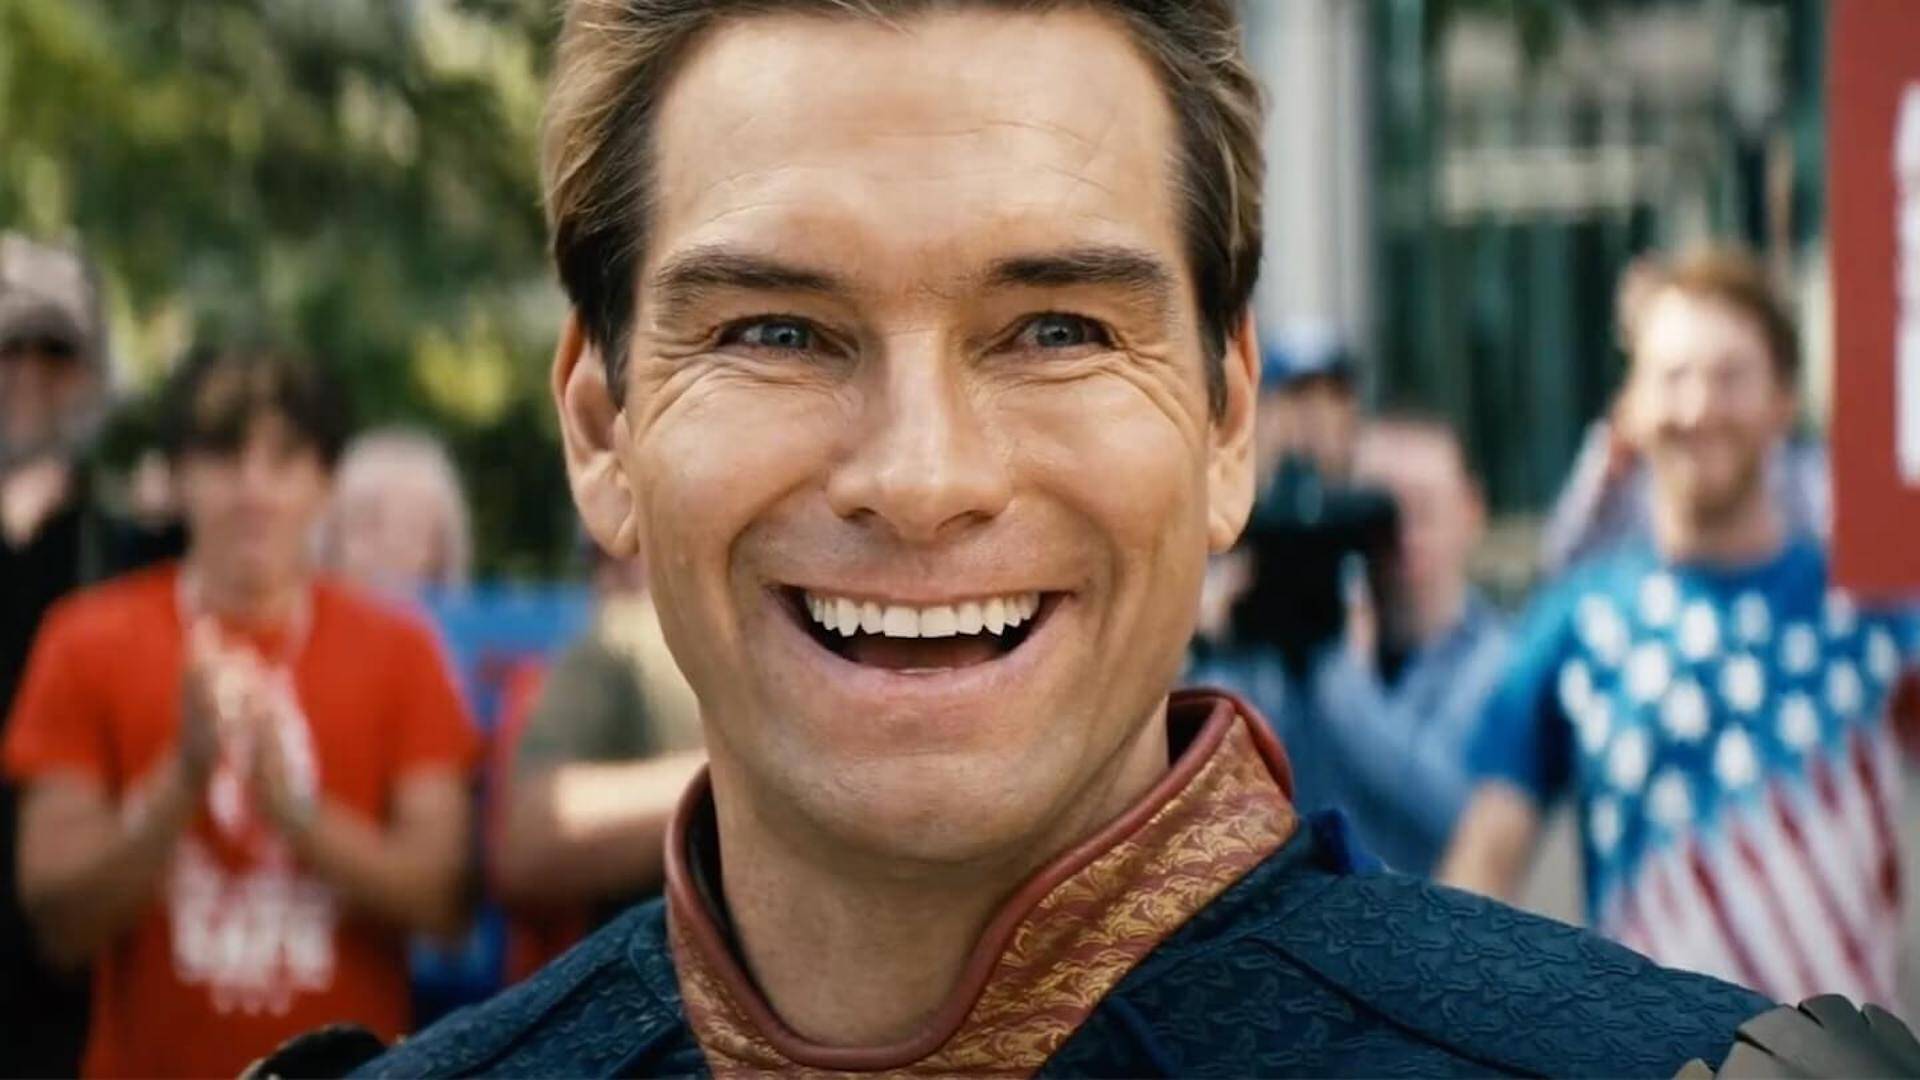 Homelander (Antony Starr) laughing at a rally in 'The Boys,' Character Breakdown: Will Homelander Get a Redemption Arc in 'The Boys'?